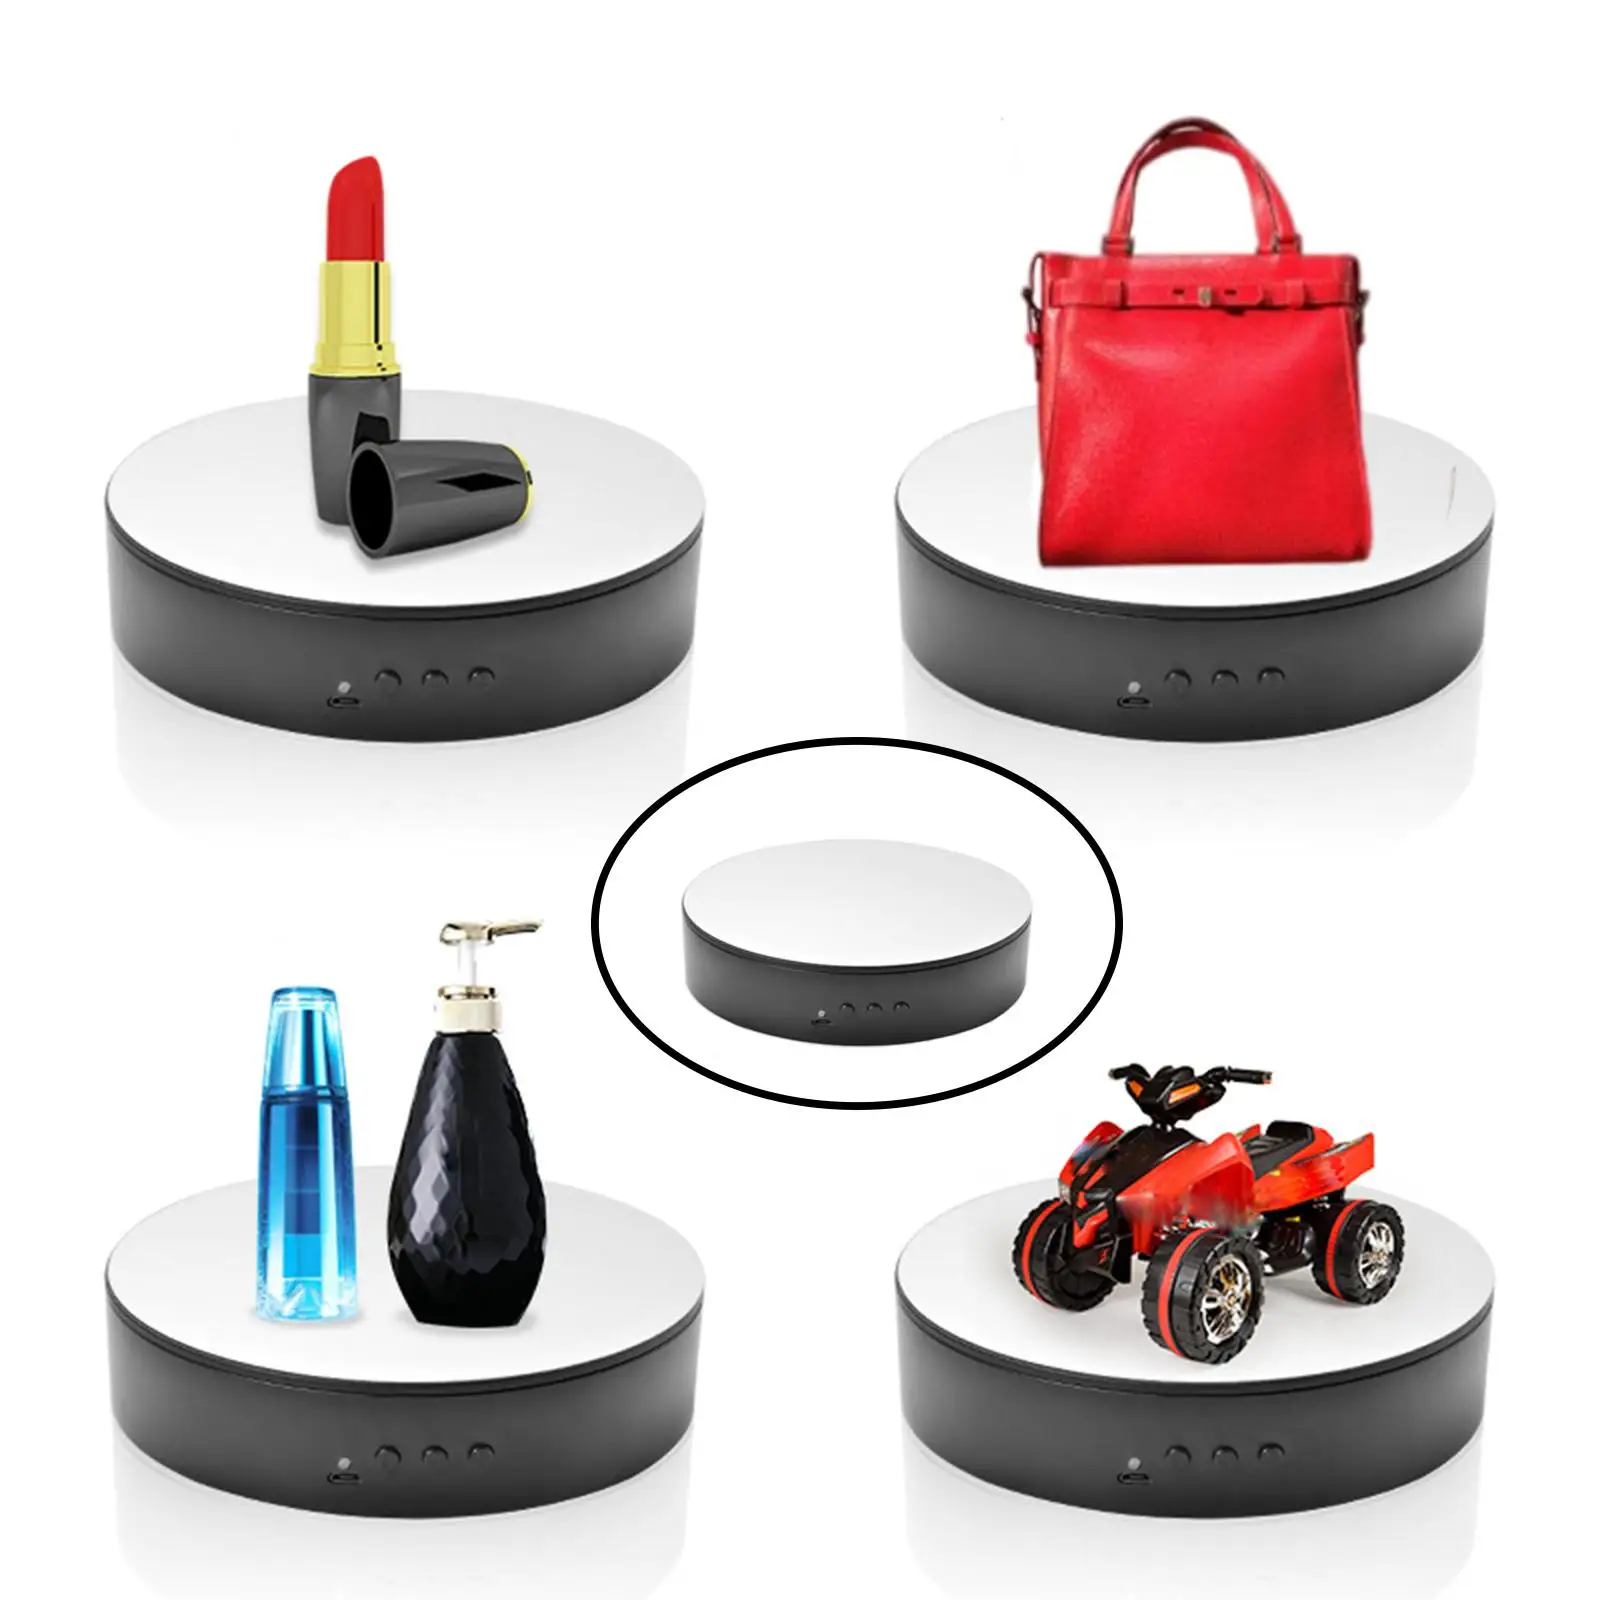  Rotating Display Stand Electric 5.91inch/15cm Diameter 360 Degree Turntable for Gift  Cake